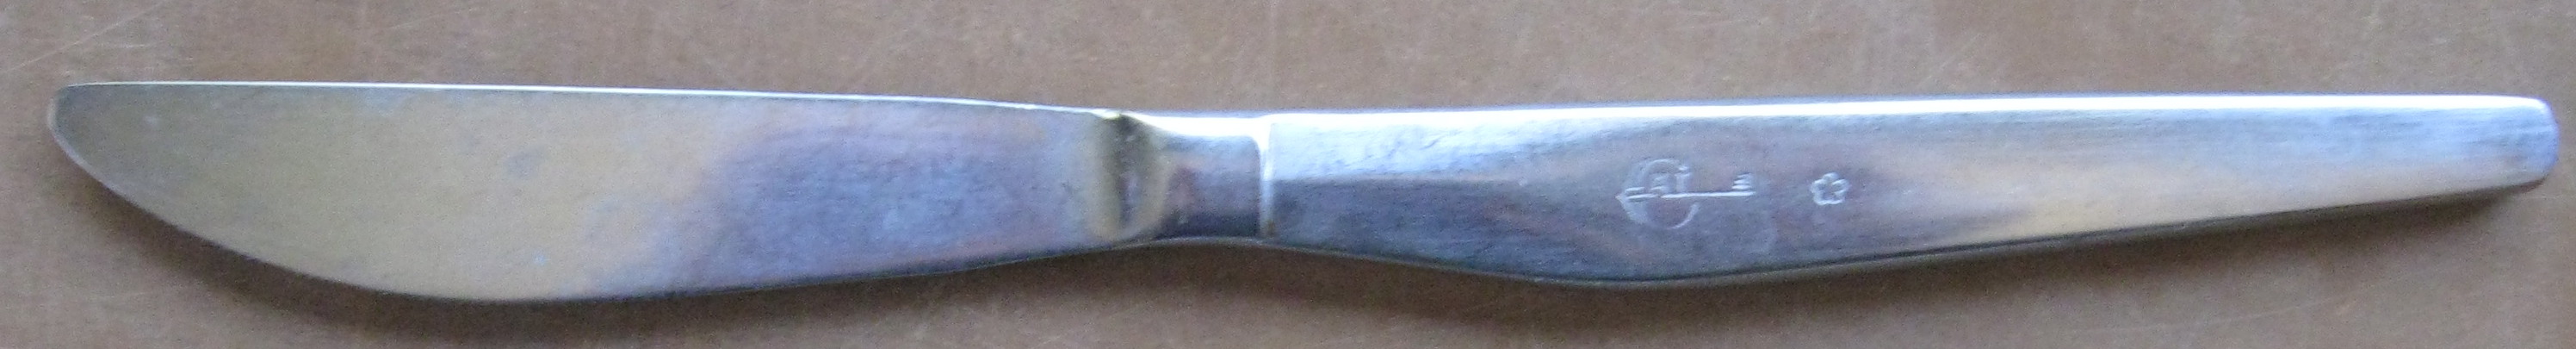 China Air Lines stainless knife